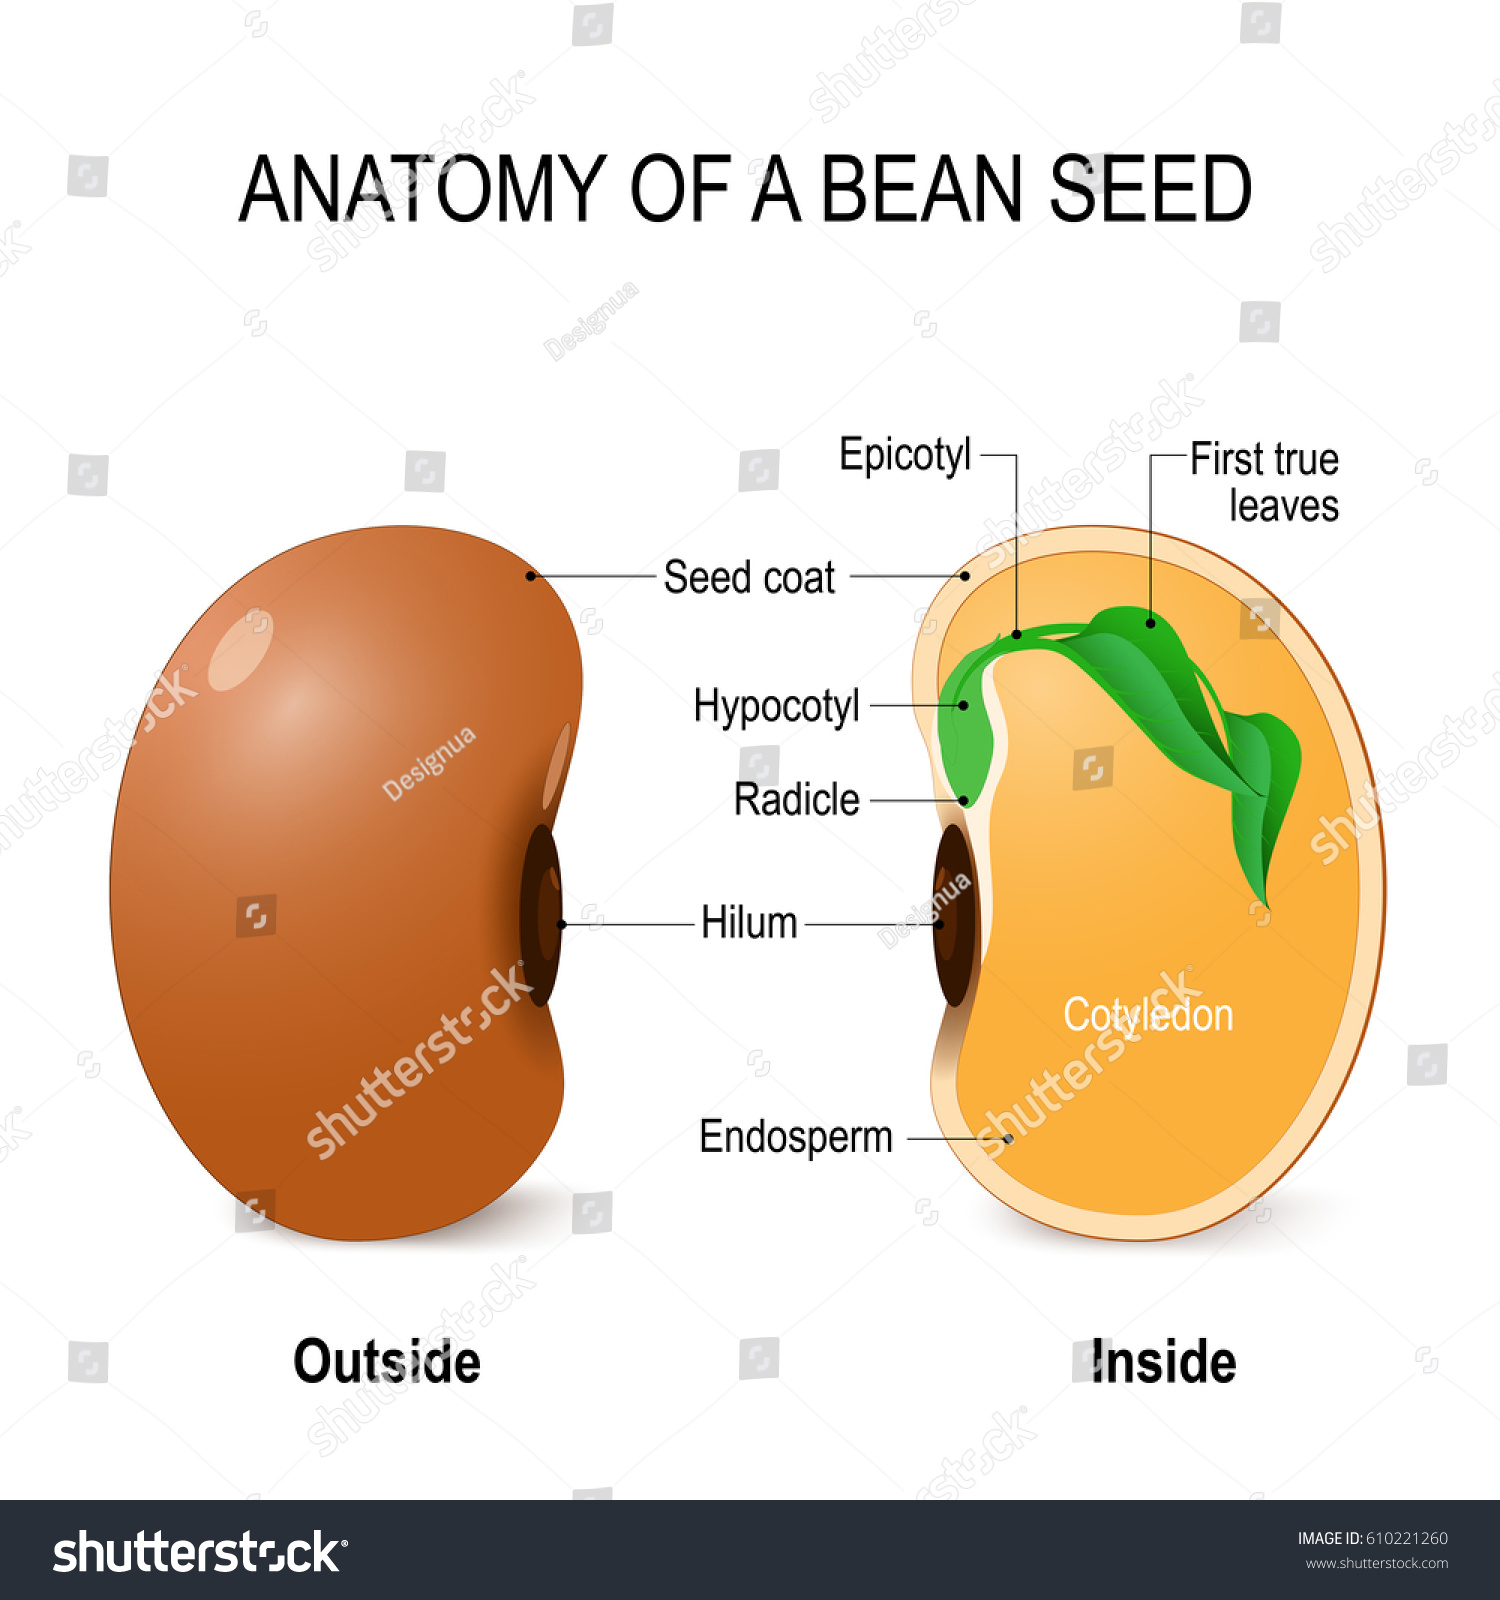 Label The Parts Of A Bean Seed